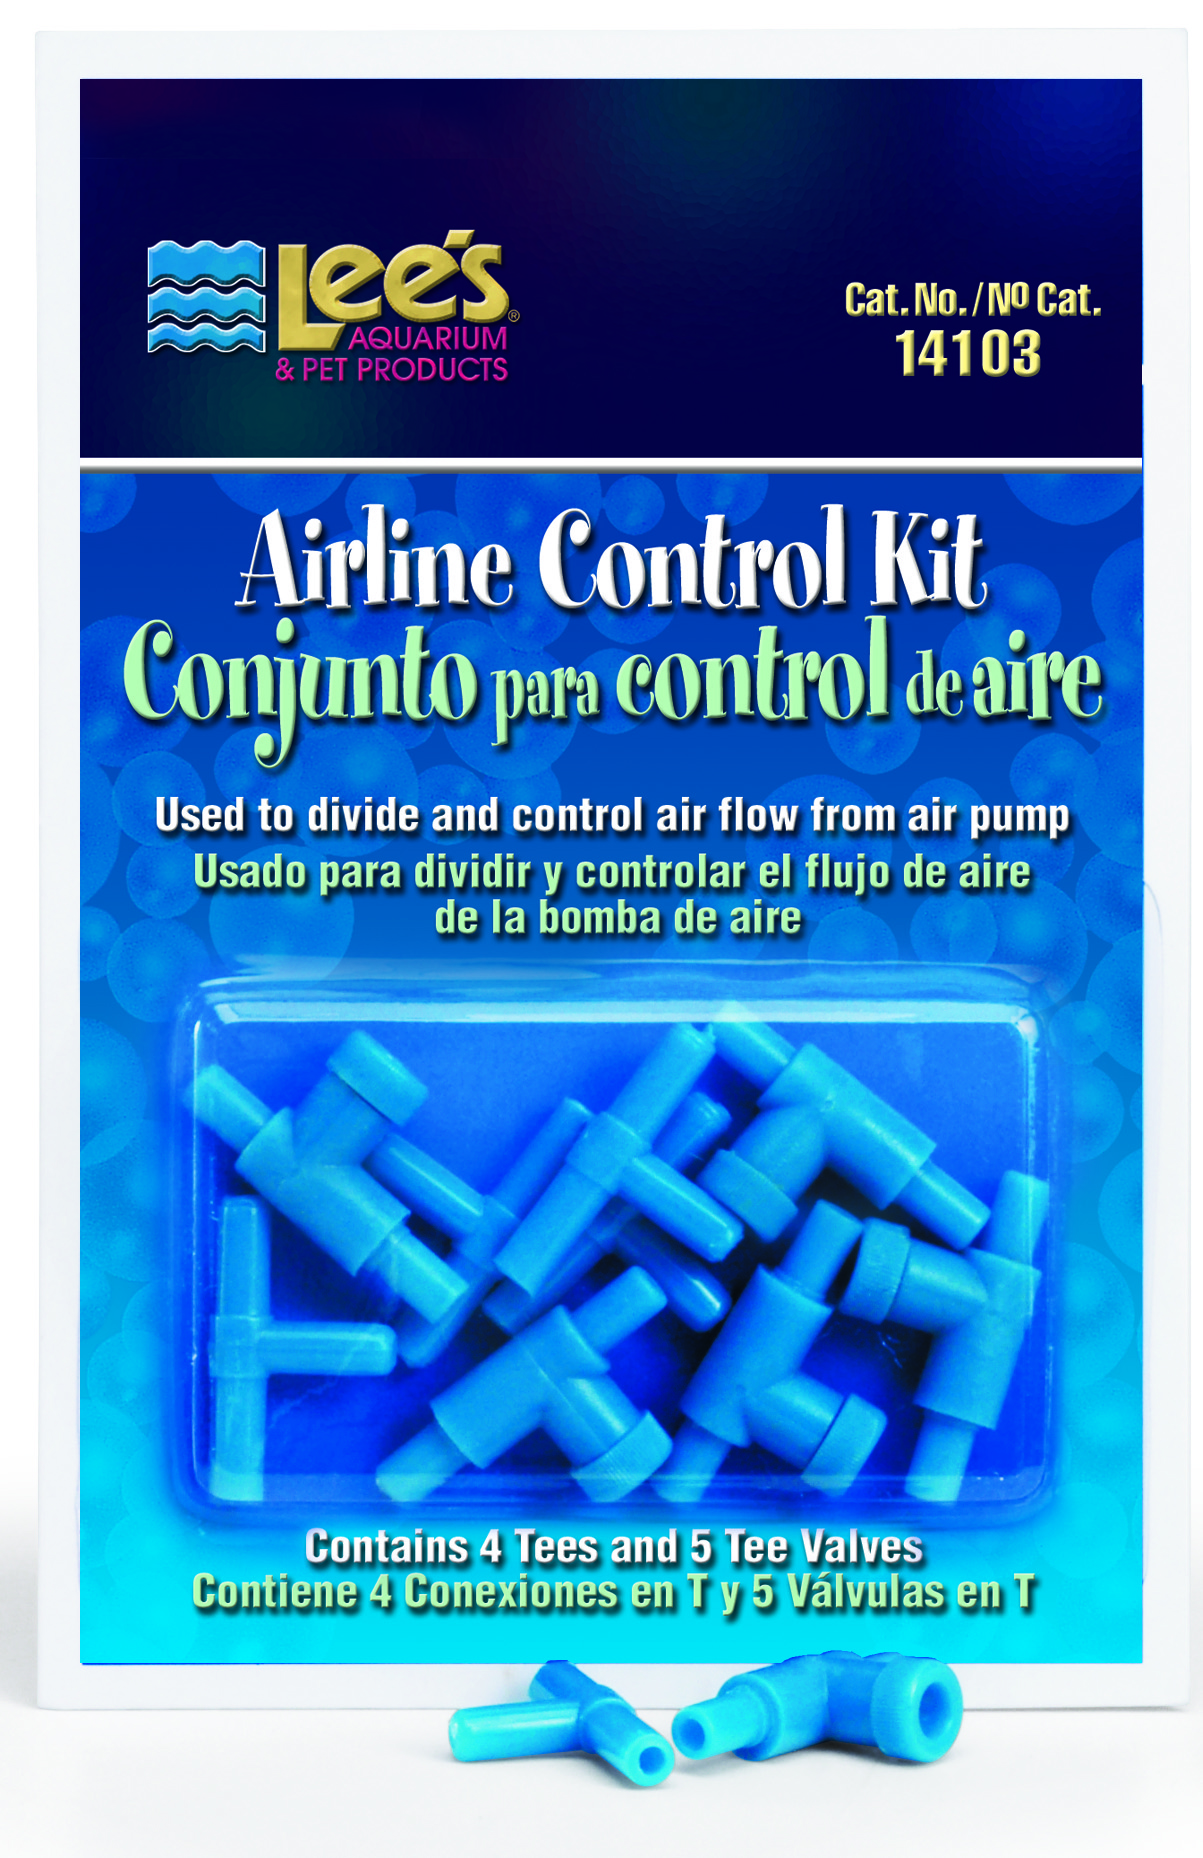 AIRLINE CONTROL KIT